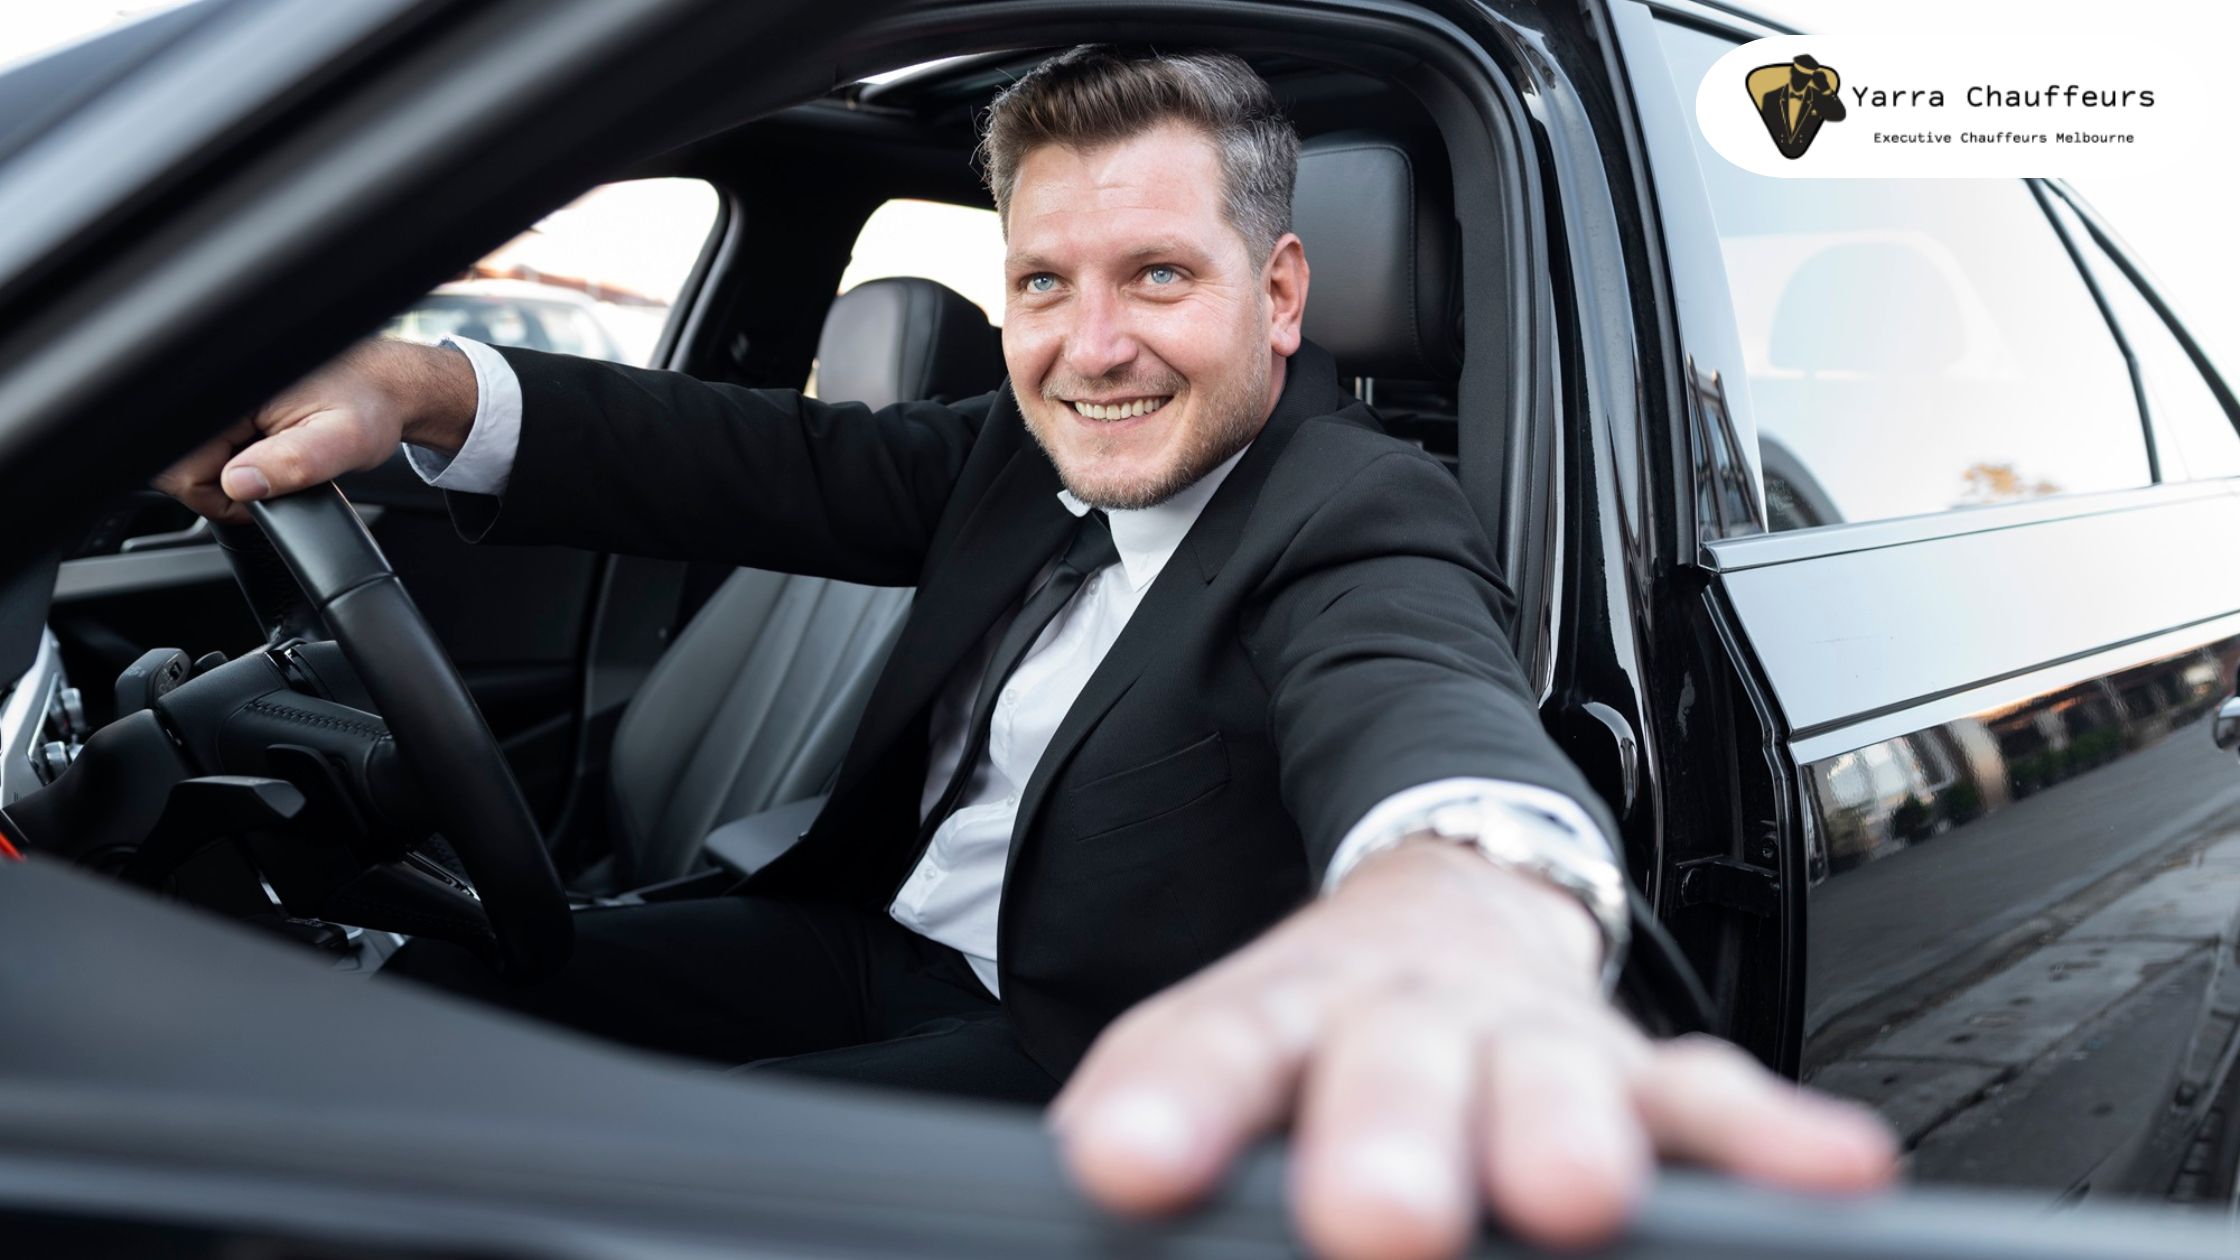 Discover Luxury And Convenience With Melbourne's Premier Chauffeur Service - Yarra Chauffeurs